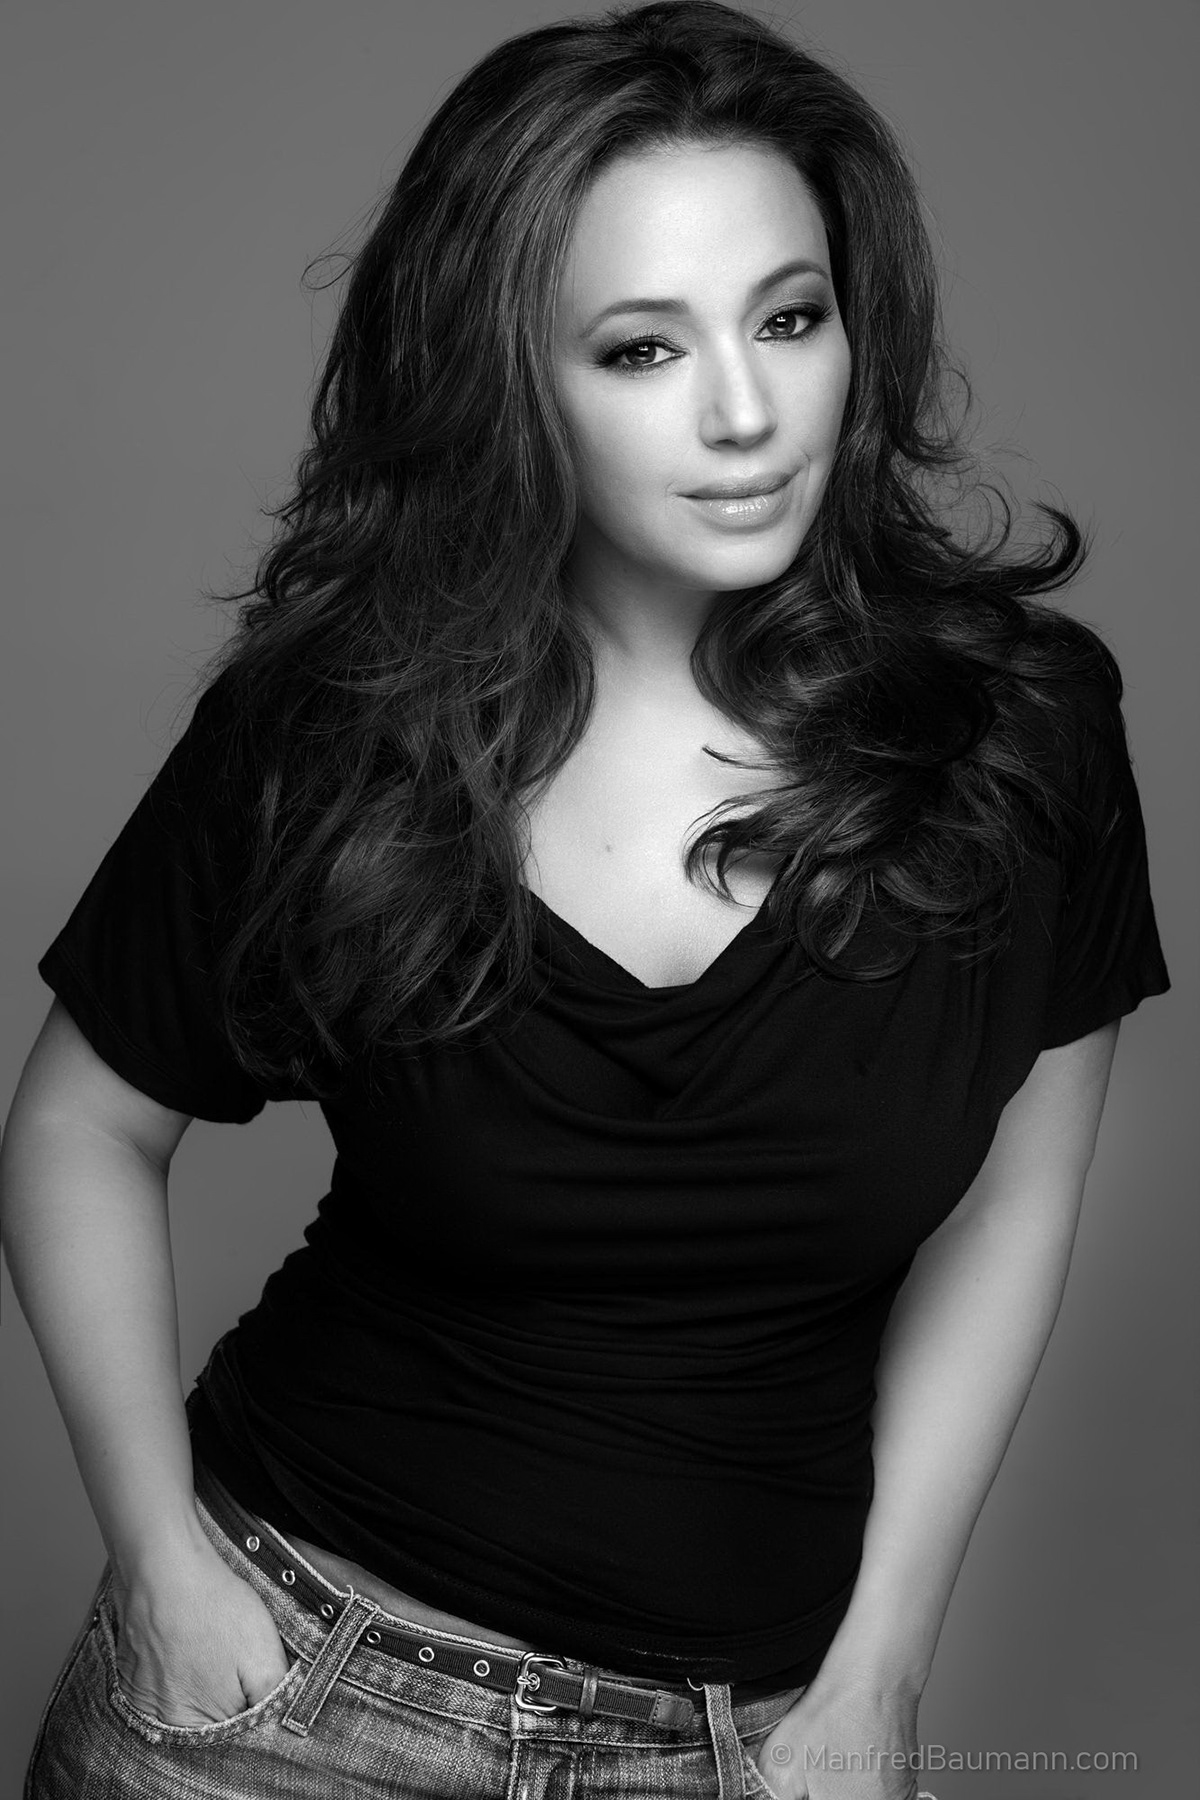 Pictures of leah remini